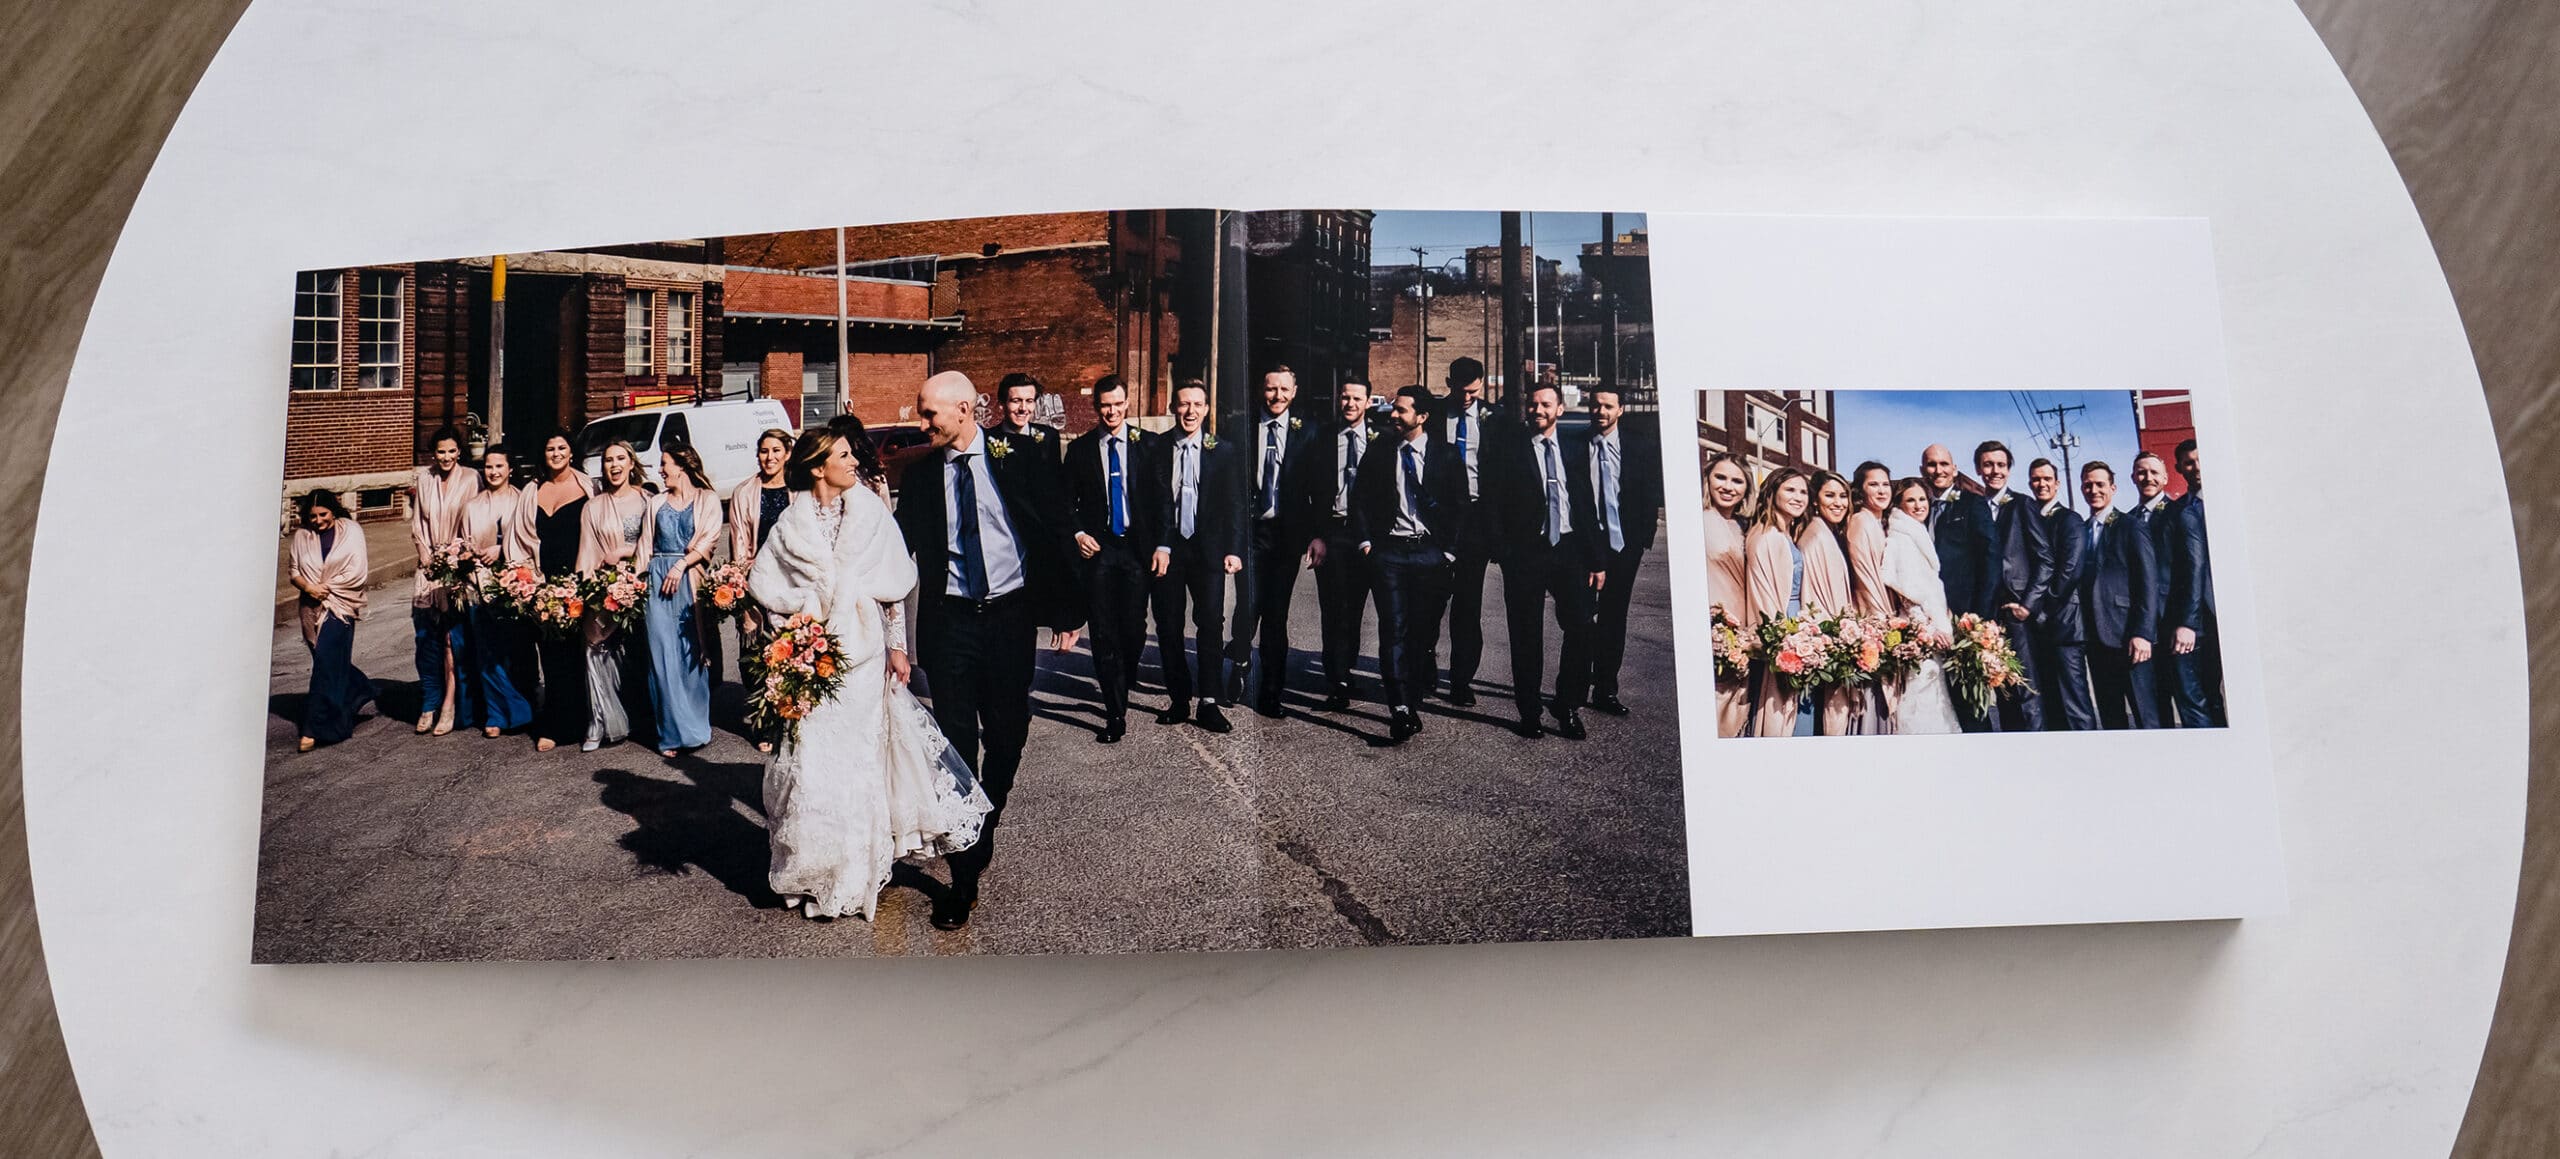 A picture of a wedding album laying open, showing a bride and groom with their wedding party.